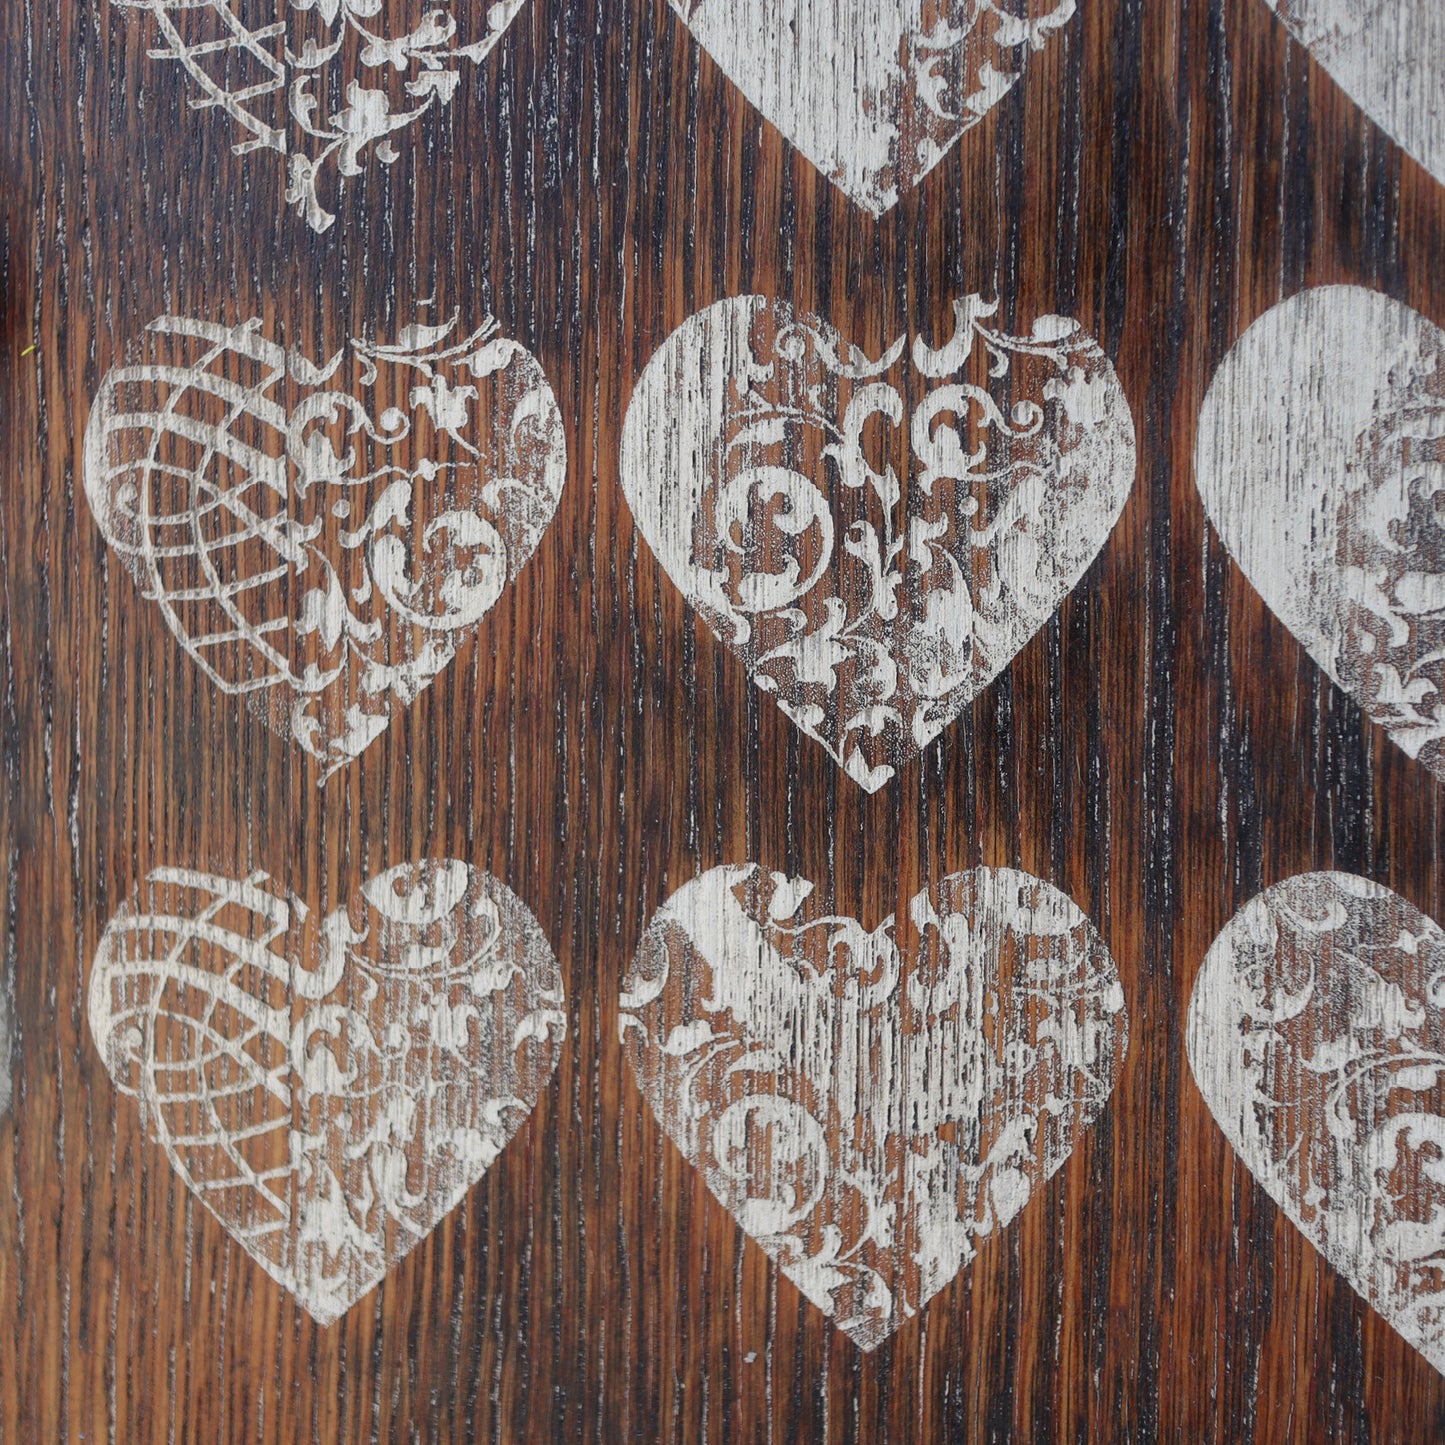 Load image into Gallery viewer, Ornamental Engraved Hearts Artwork
